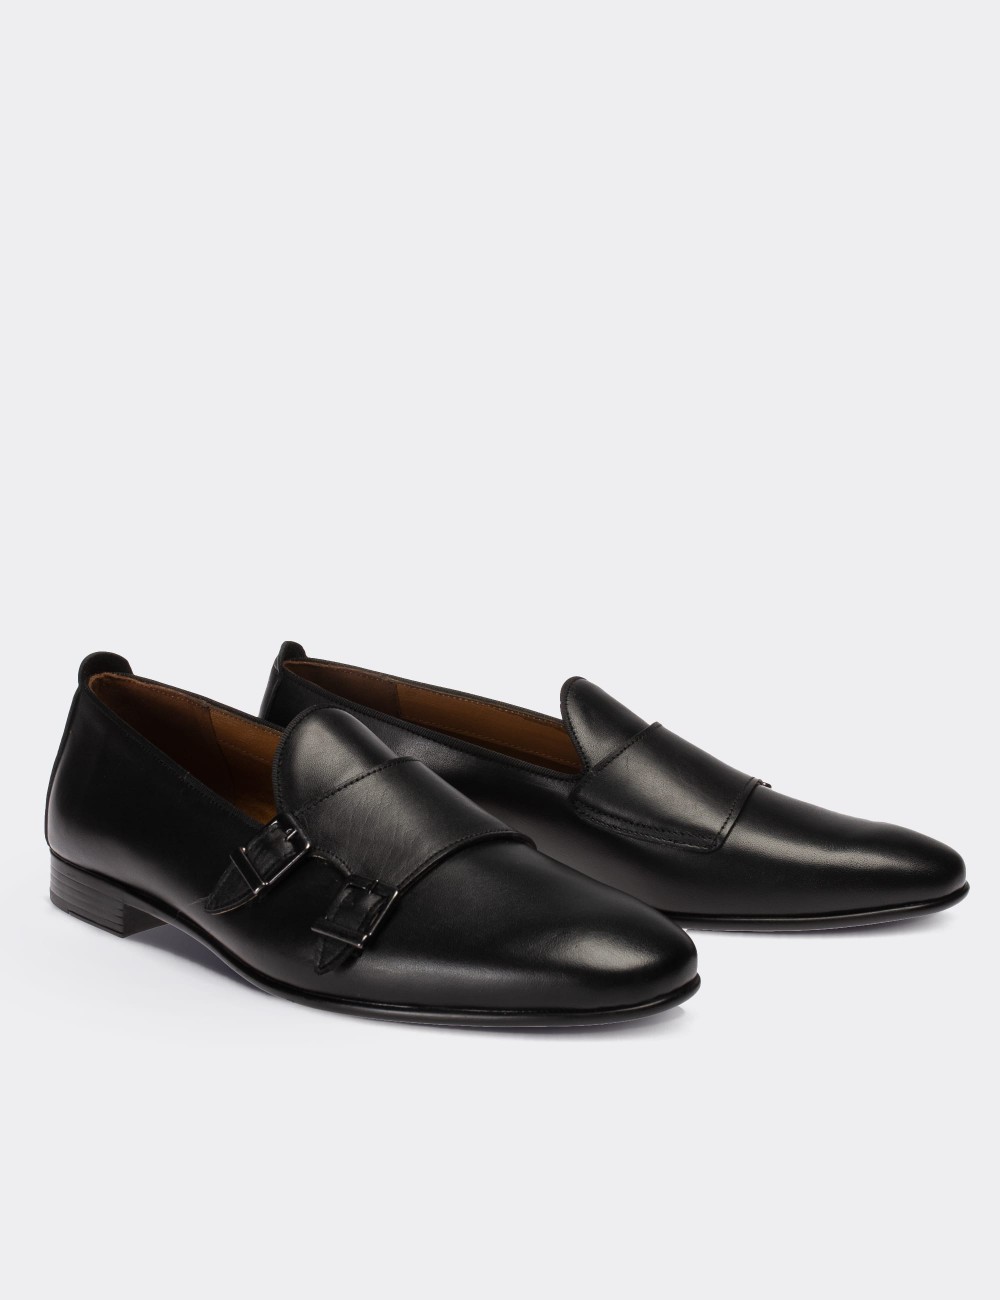 Black  Leather Loafers Shoes - 01705MSYHC03